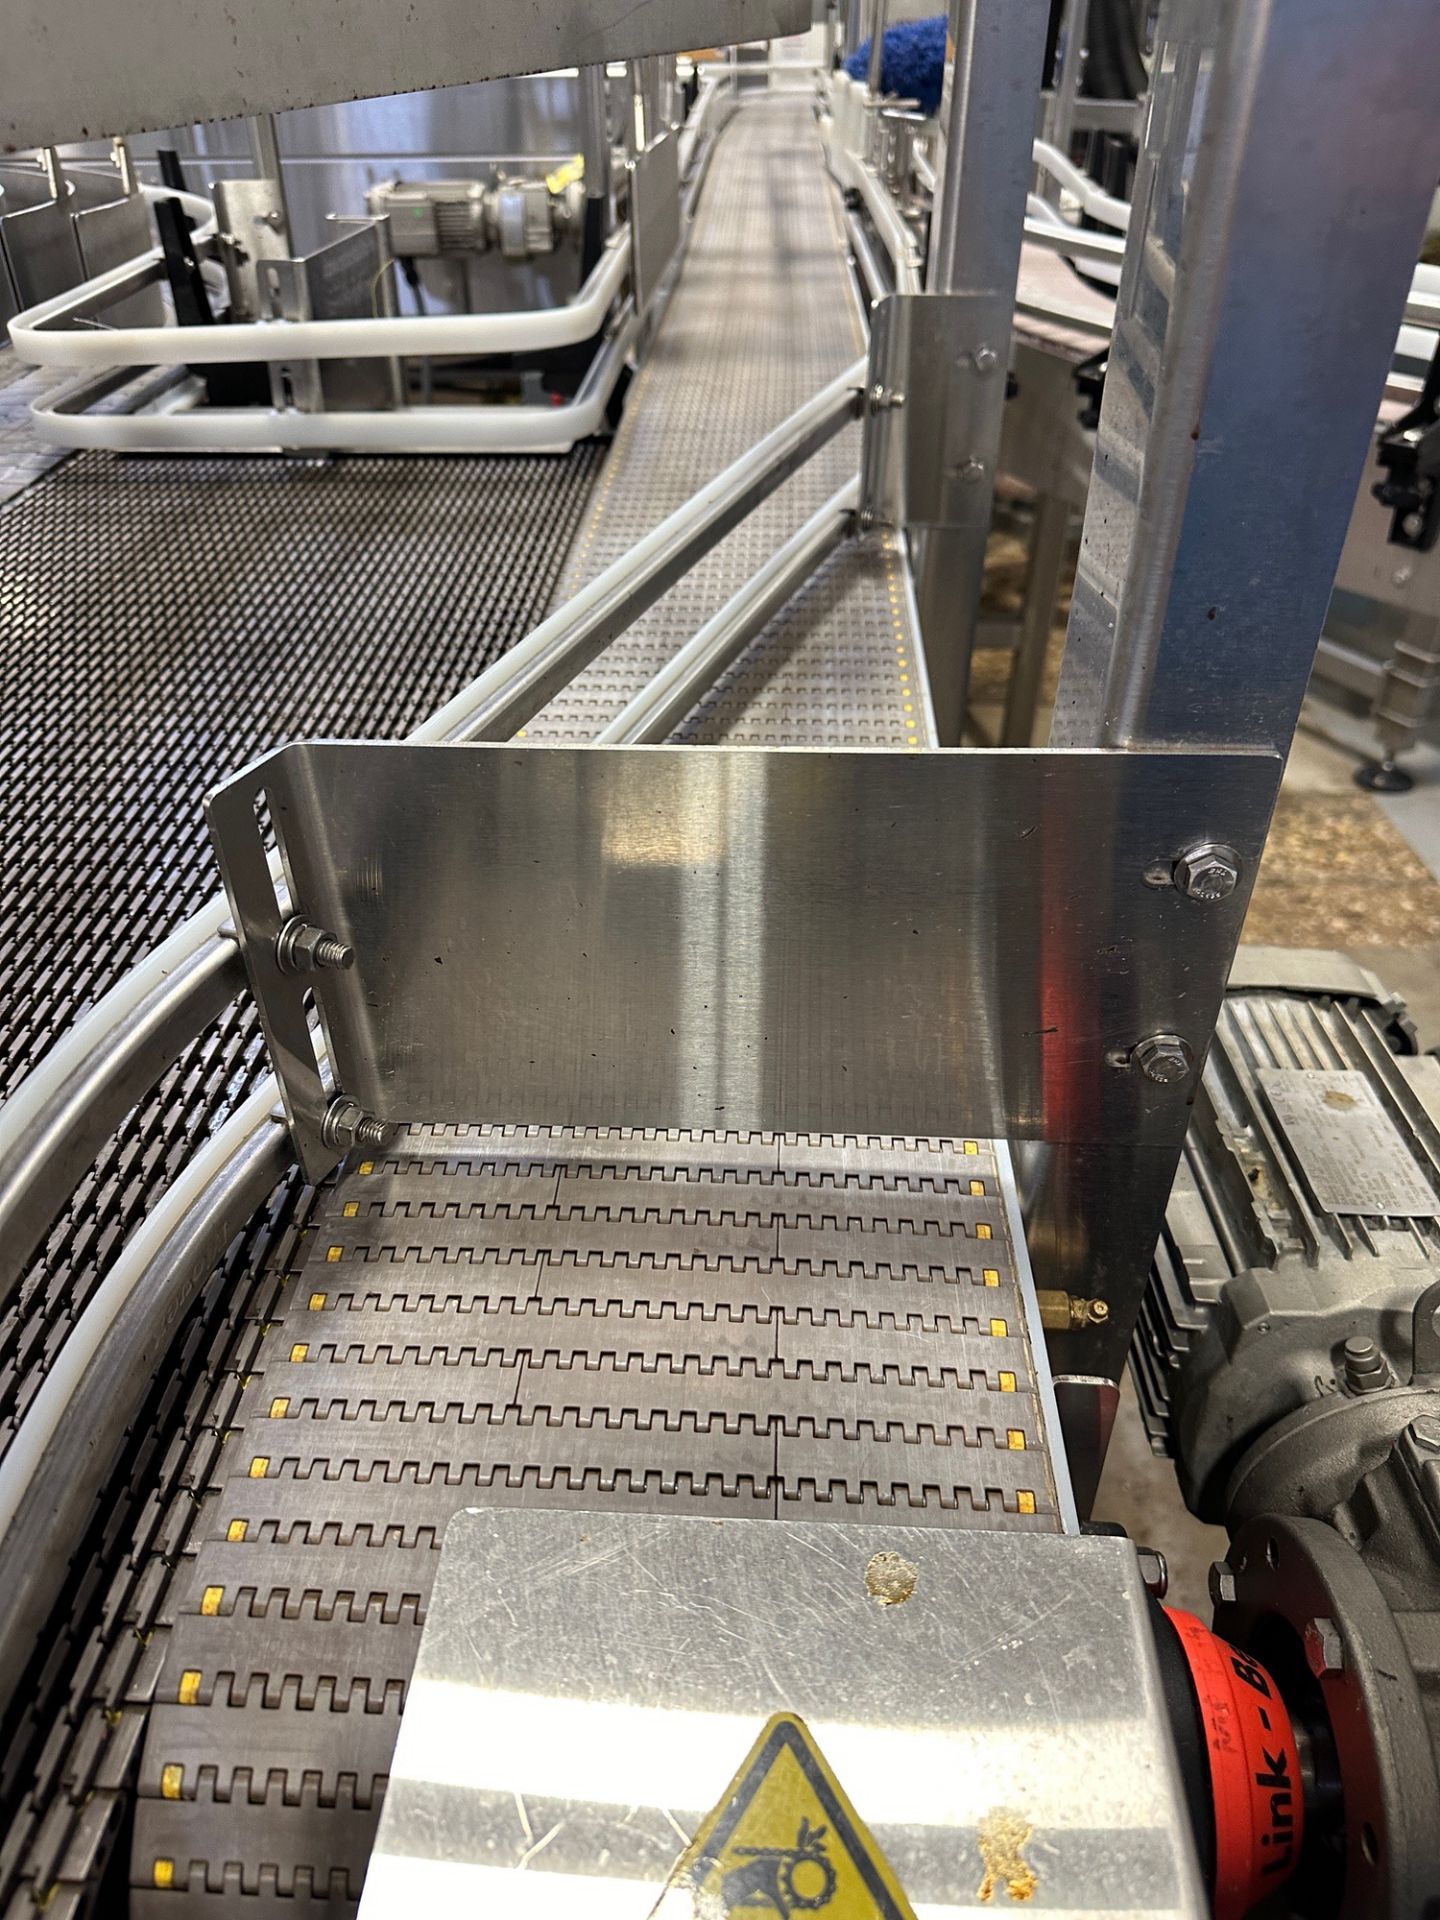 Bevco Conveyor over Stainless Steel Frame (Approx. 9" x 16') | Rig Fee $750 - Image 2 of 3